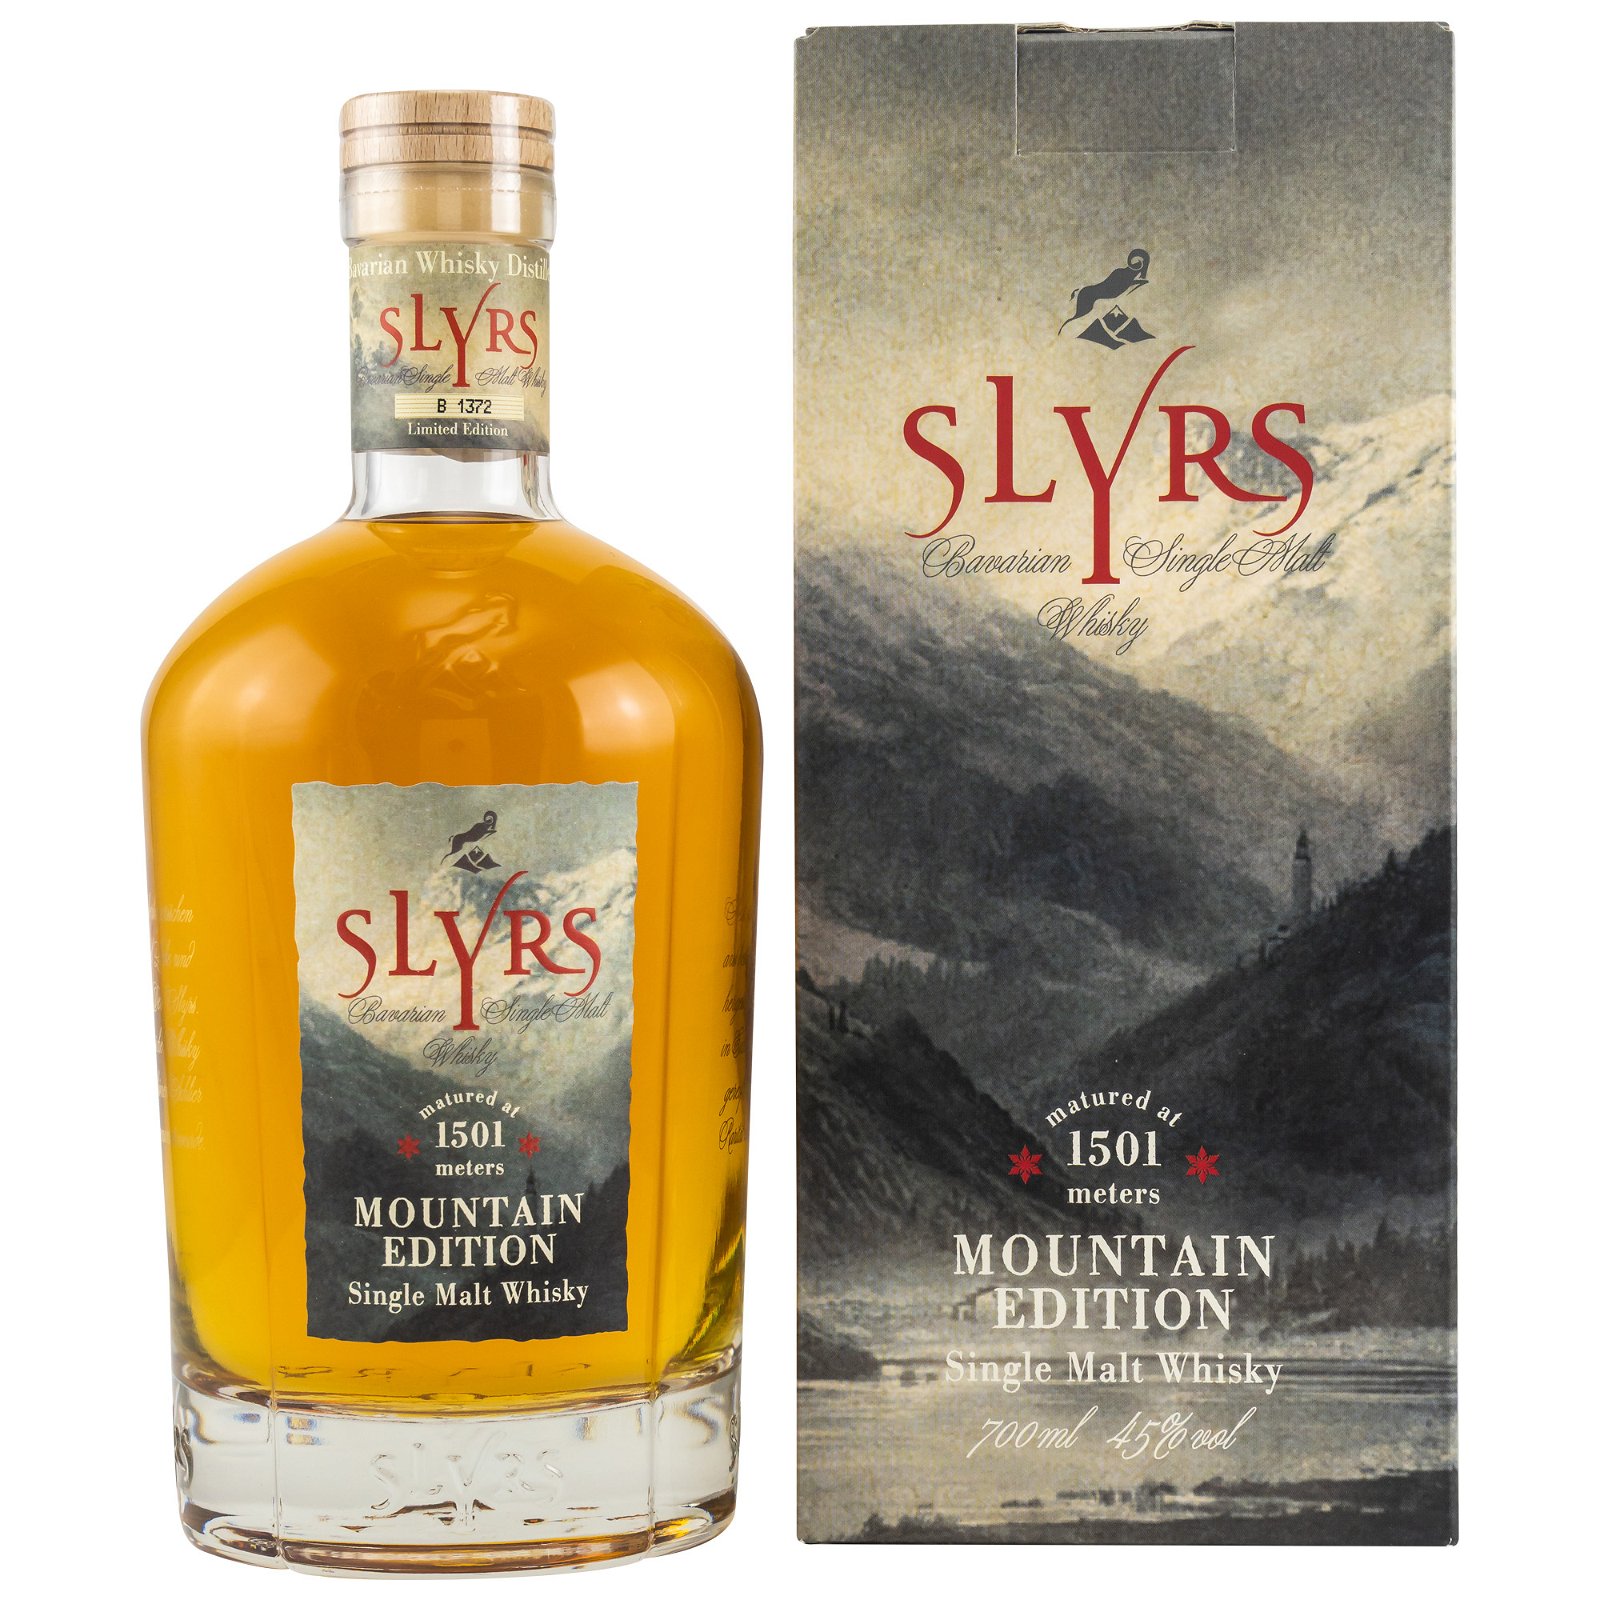 Slyrs Mountain Edition 1501 Limited Edition